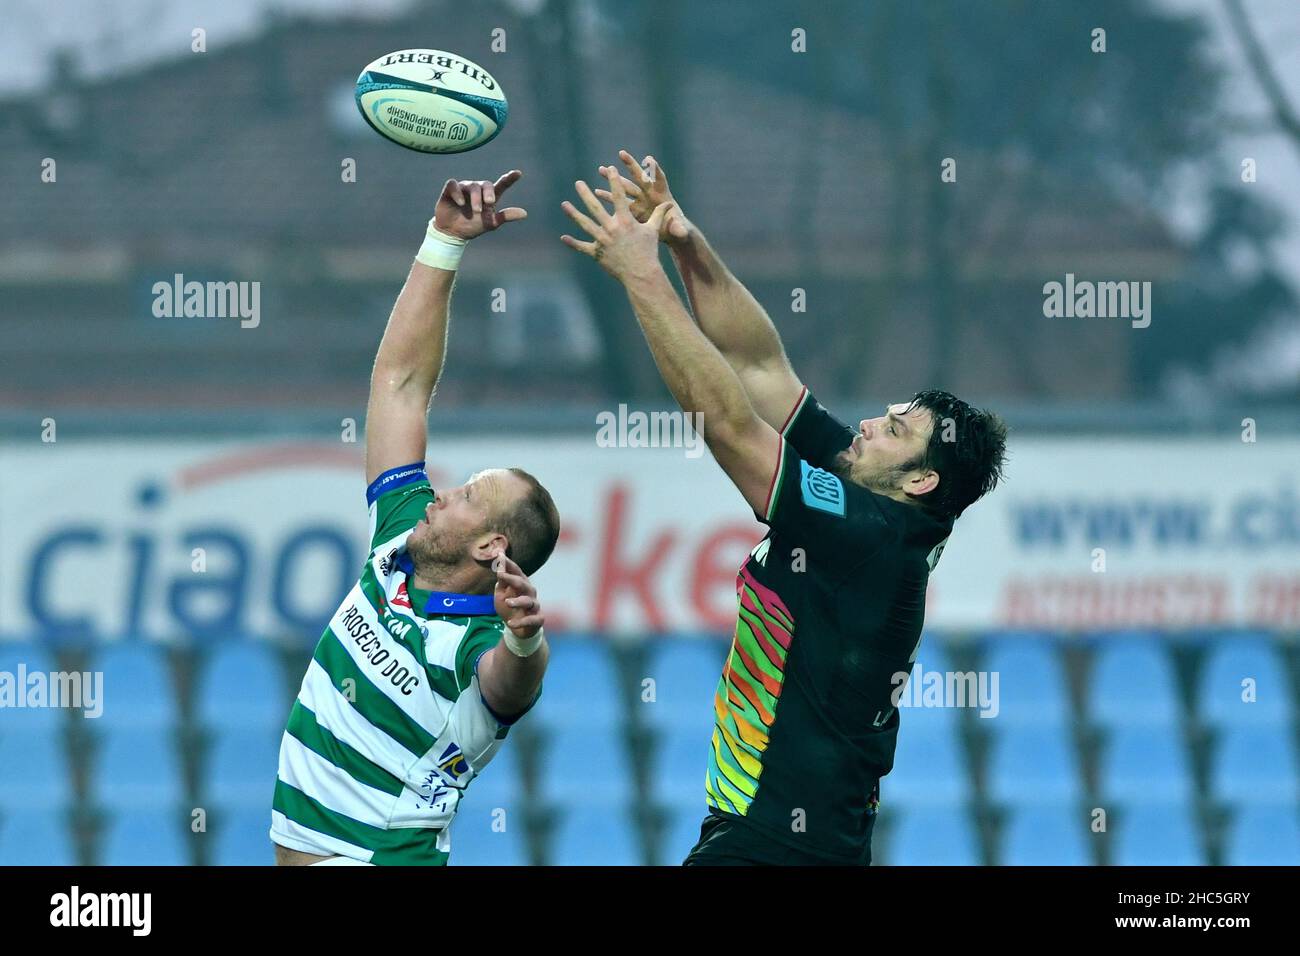 Sergio Lanfranchi stadium, Parma, Italy, December 24, 2021, Carl Wegner ( benetton) and David Sisi (zebre) during Zebre Rugby Club vs Benetton Rugby  - United Rugby Championship match Stock Photo - Alamy